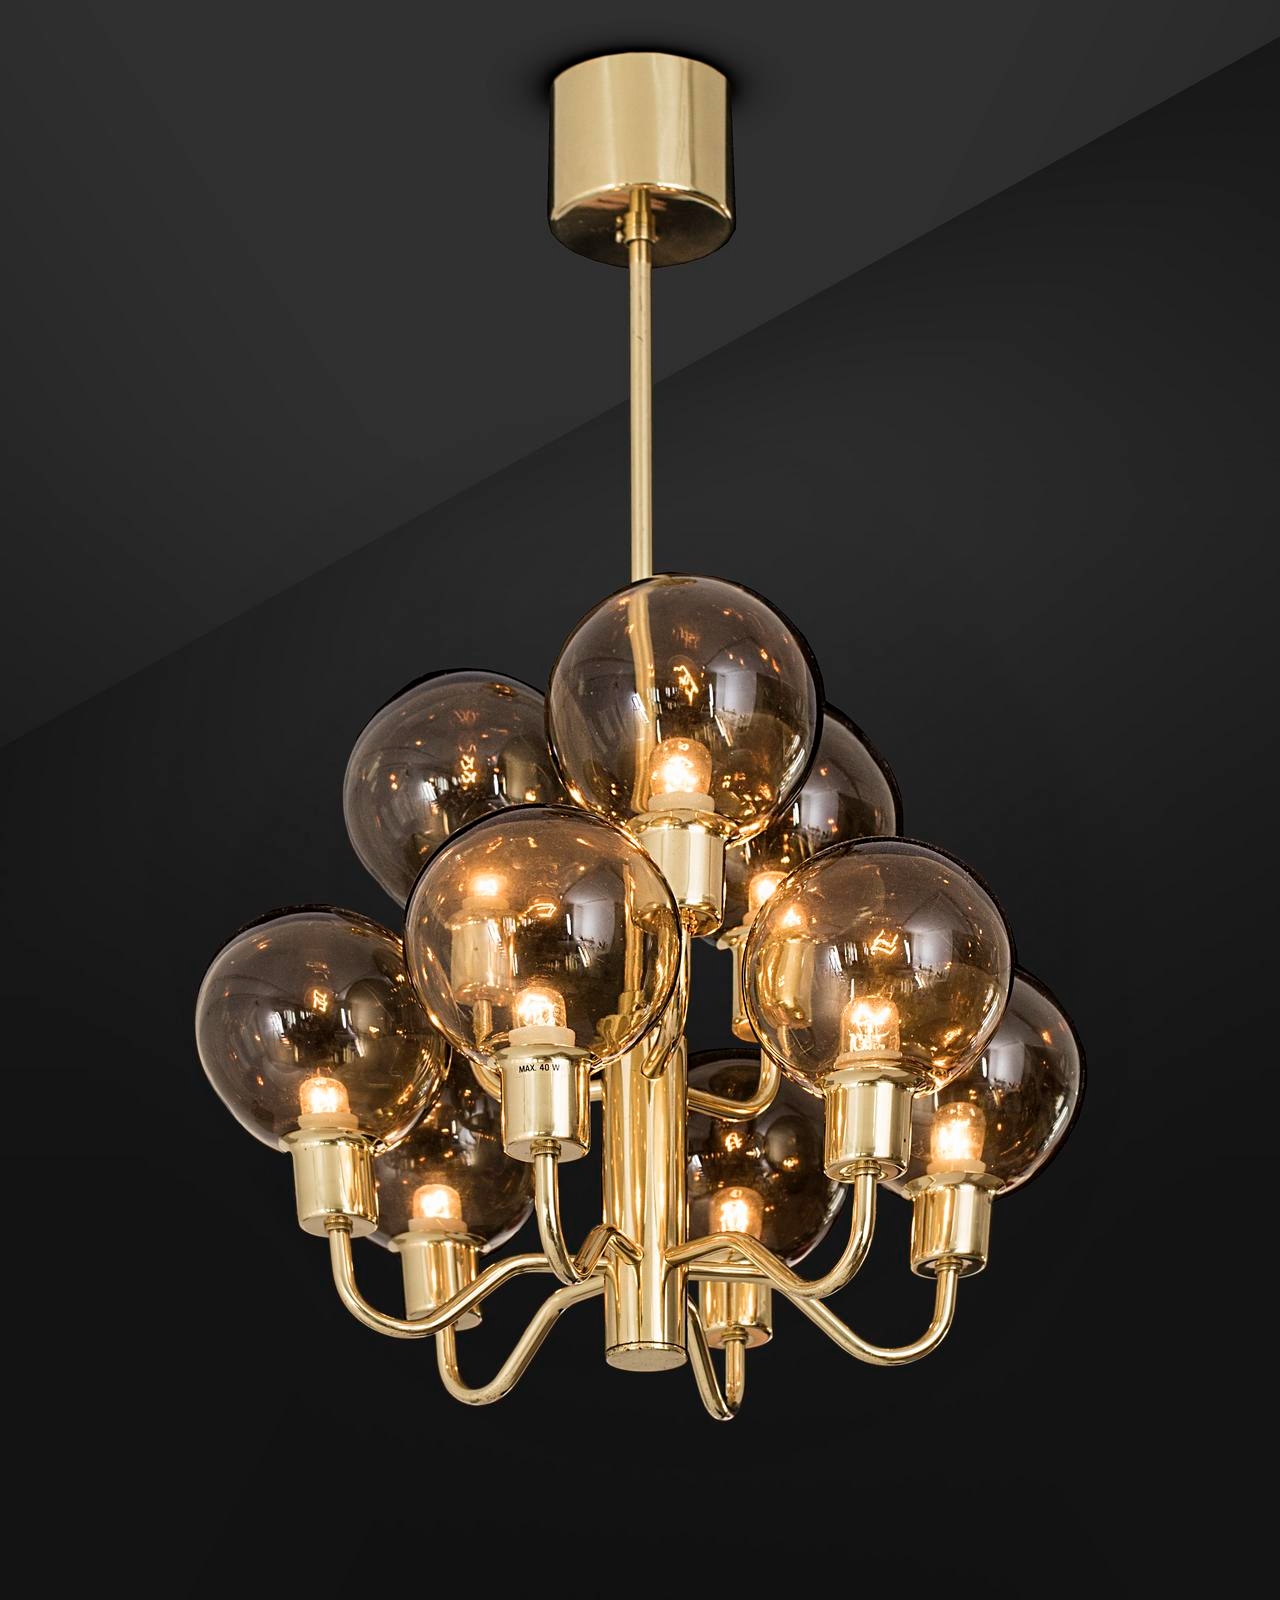 A ”T716” ceiling lamp with brown shades